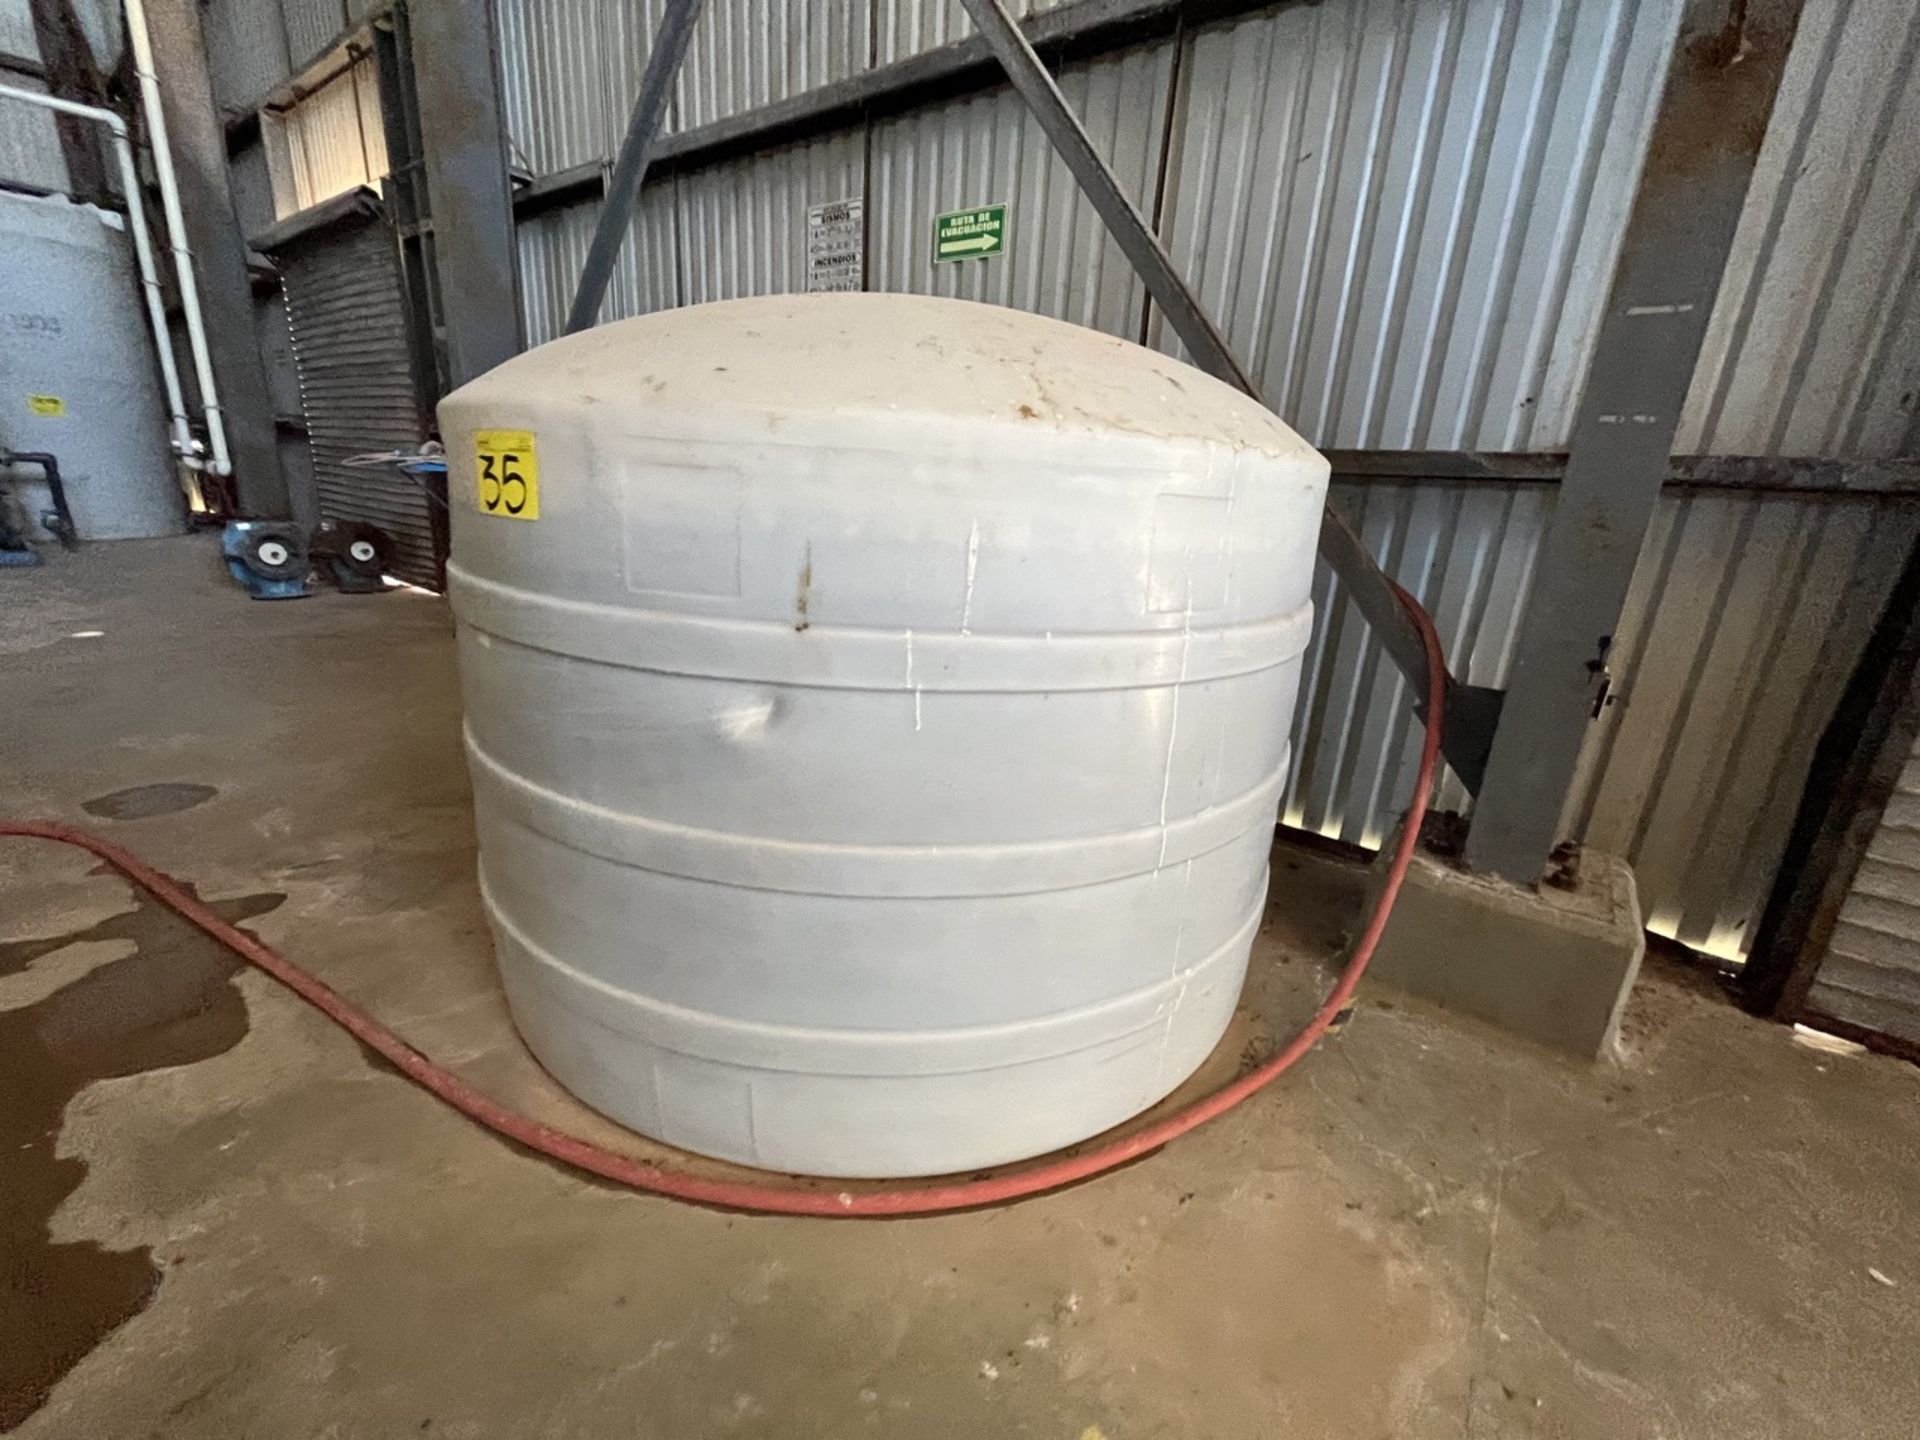 OASIS Water storage tank ,cistern type, capacity of 5 thousand liters approx, measures approx 2.10 - Image 2 of 16